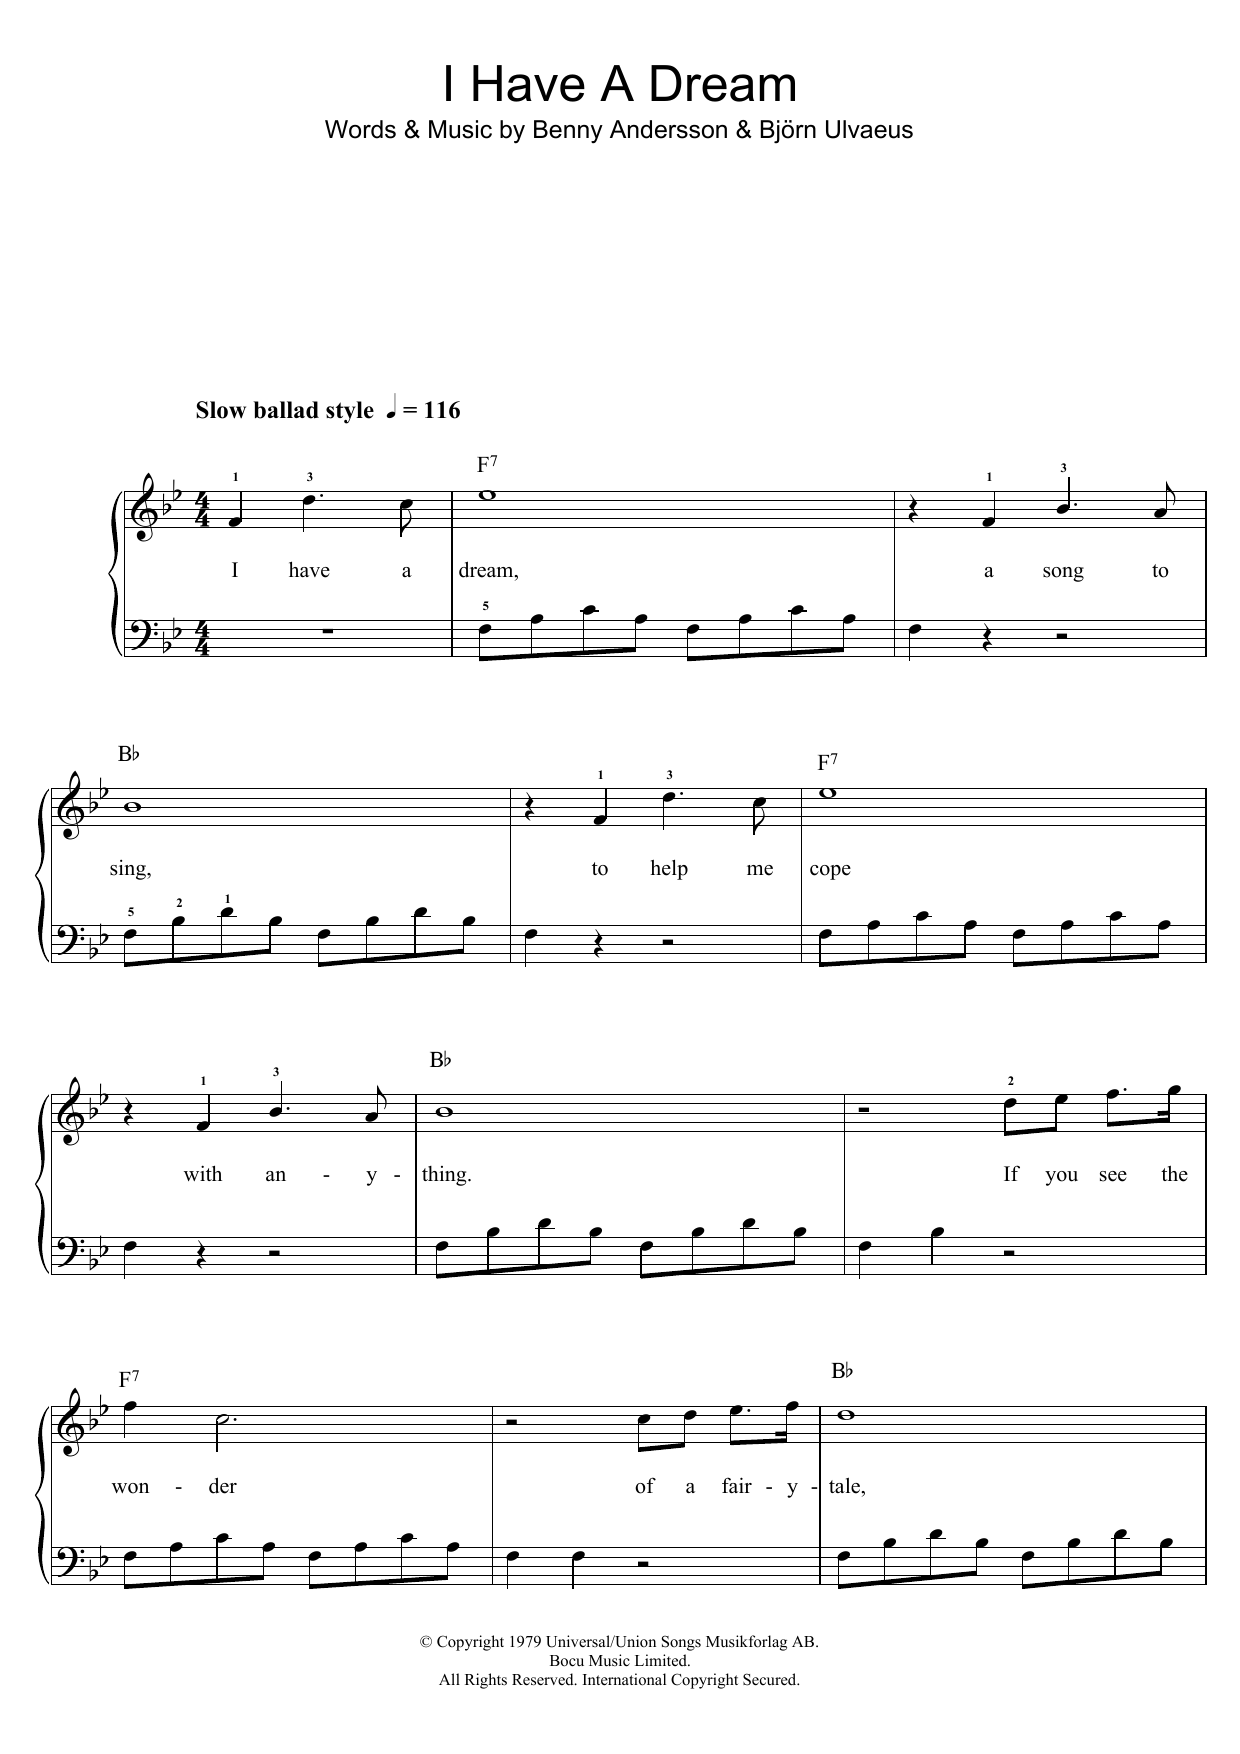 Download ABBA I Have A Dream Sheet Music